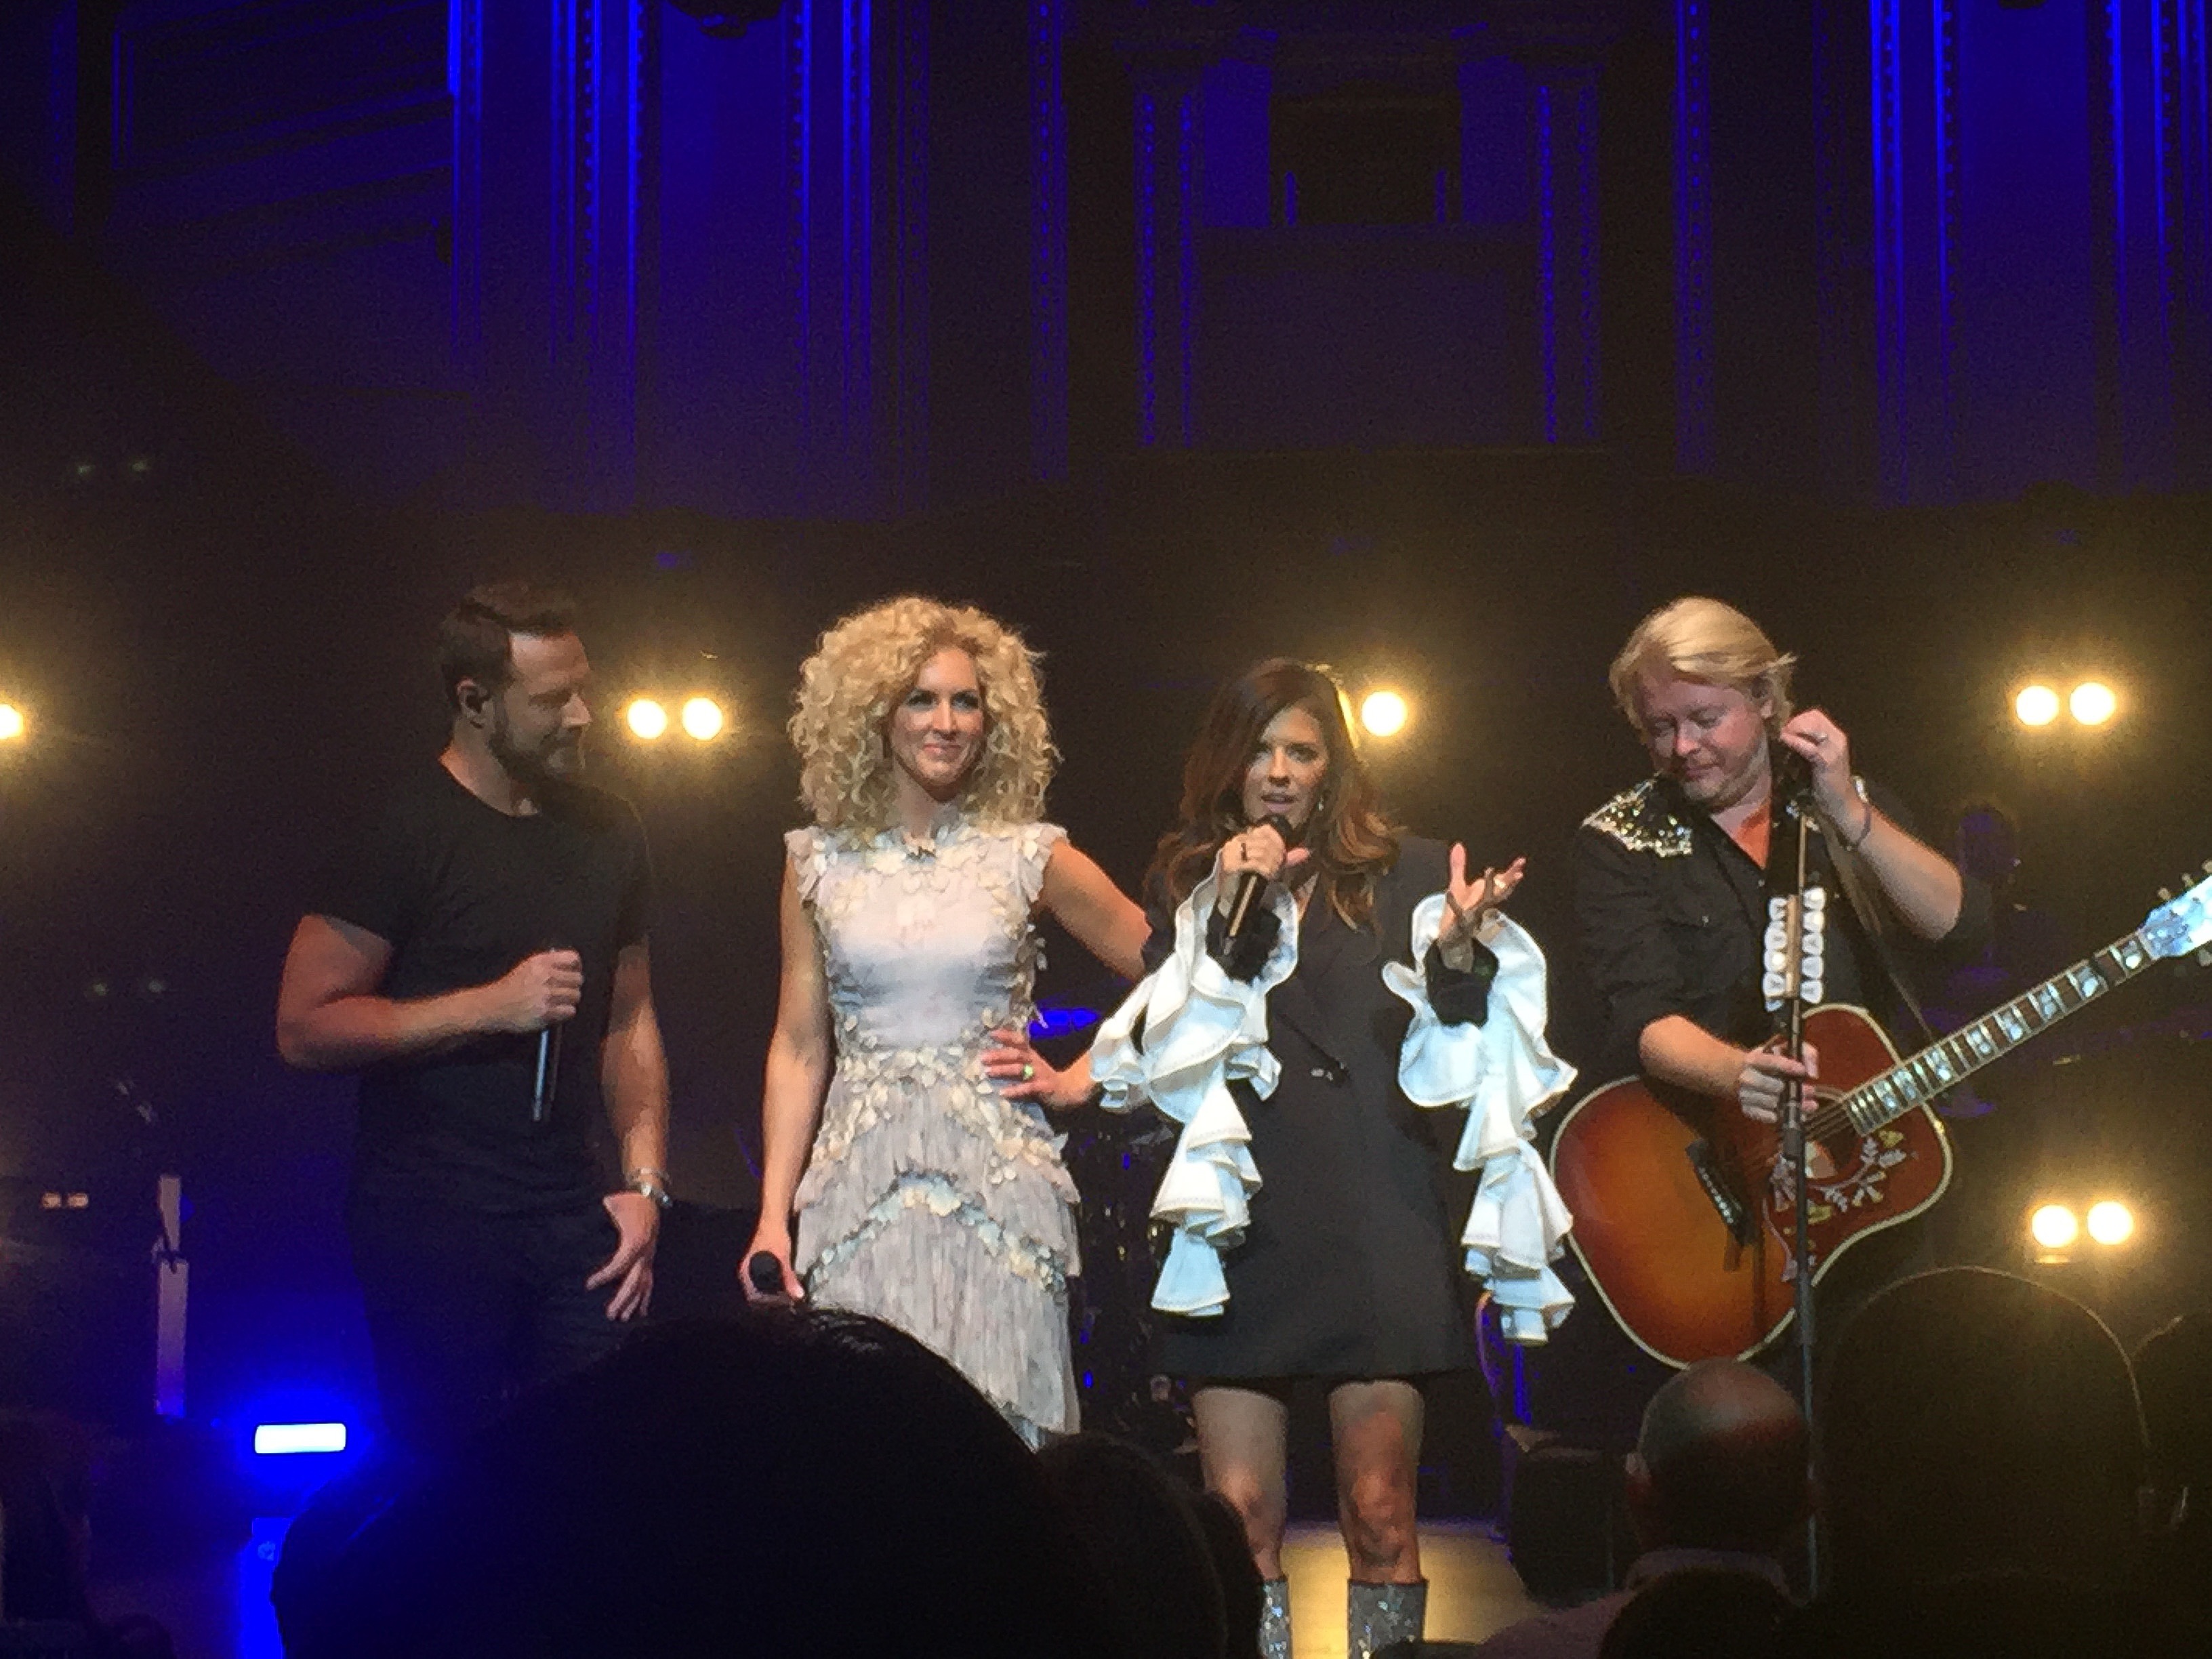 Little Big Town live on stage at the Royal Albert Hall